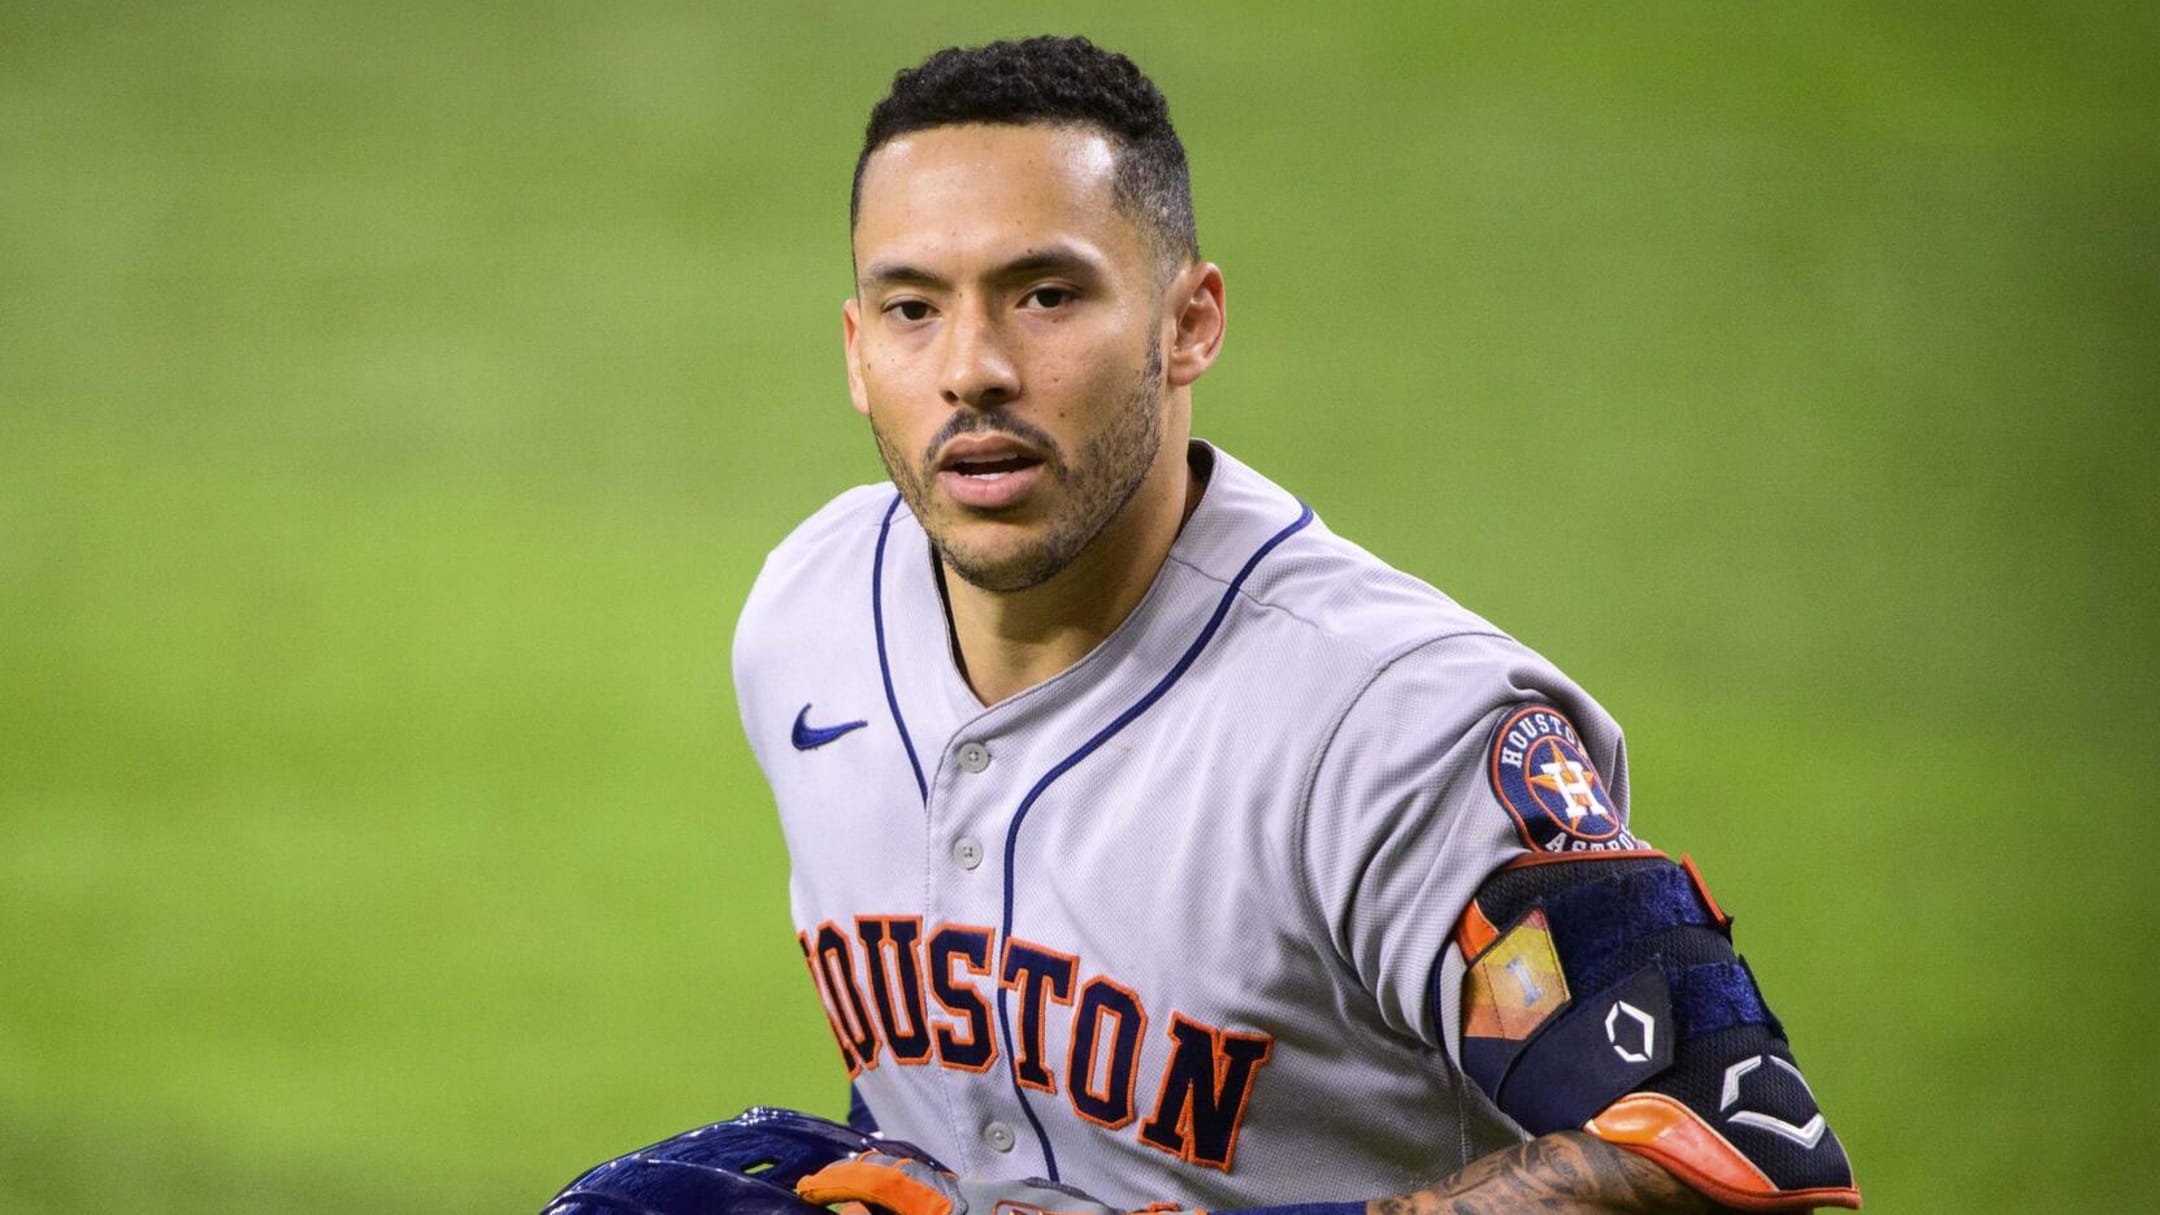 Cubs 'among the favorites' to sign All-Star Carlos Correa